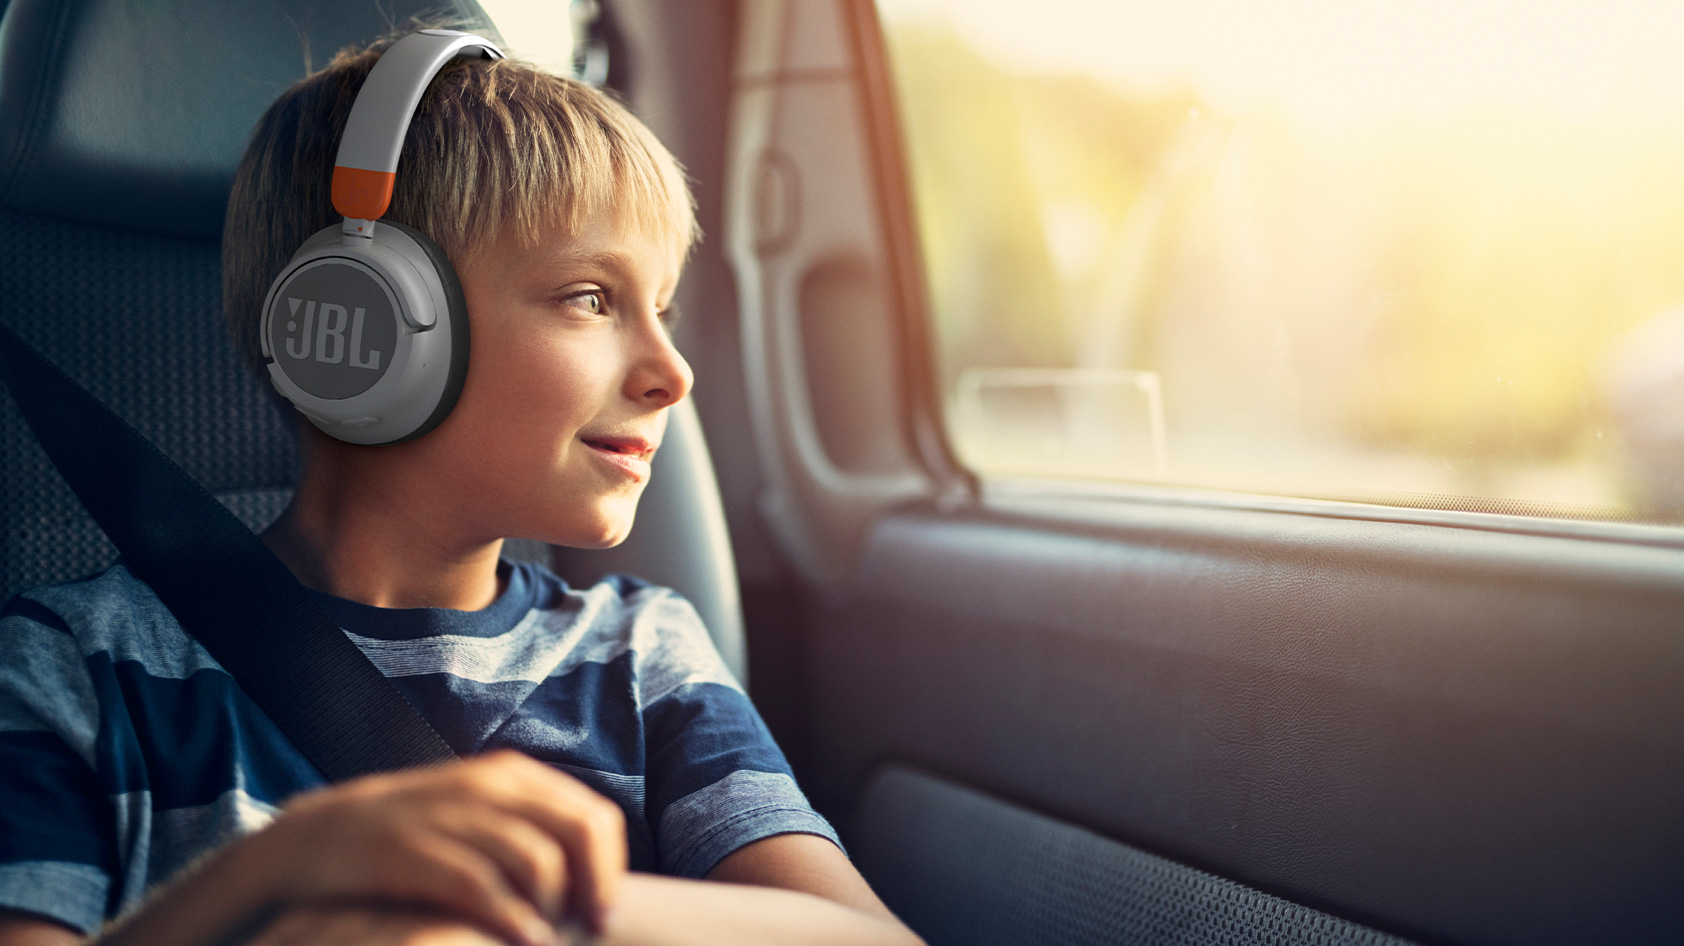 A young blonde child sits in a car while wearing the jbl jr460nc headphones in gray.